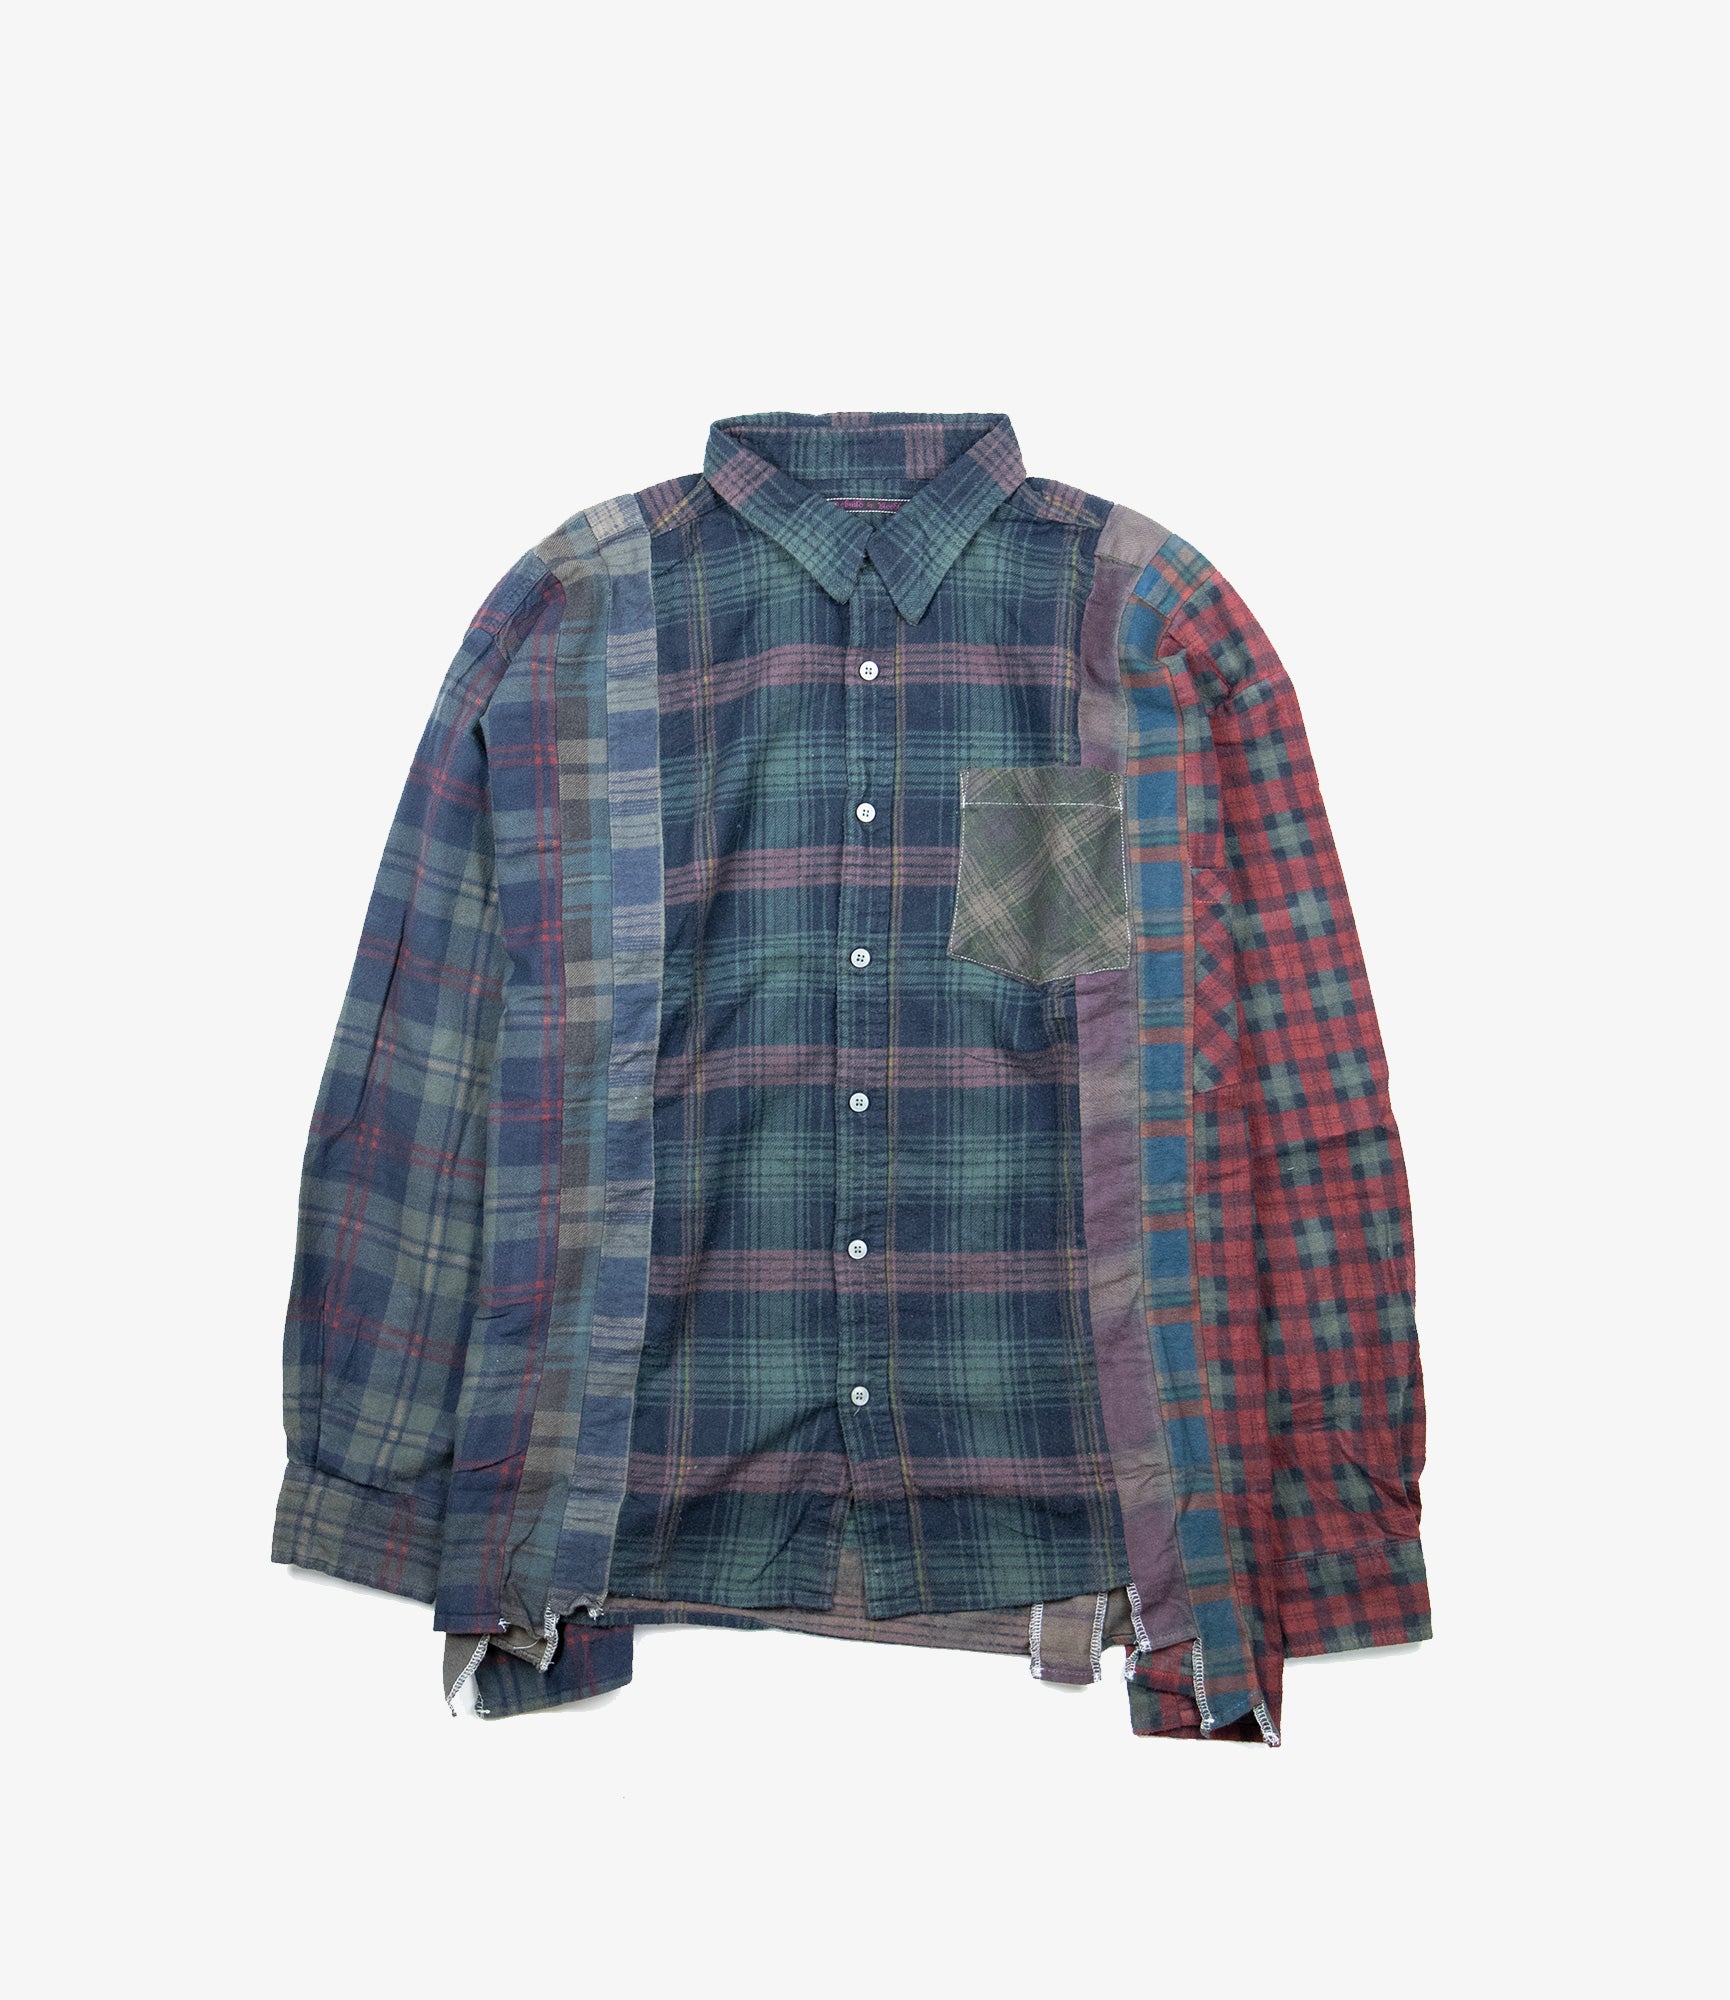 Rebuild by Needles Flannel Shirt - 7 Cuts Wide / Over Dye - Brown